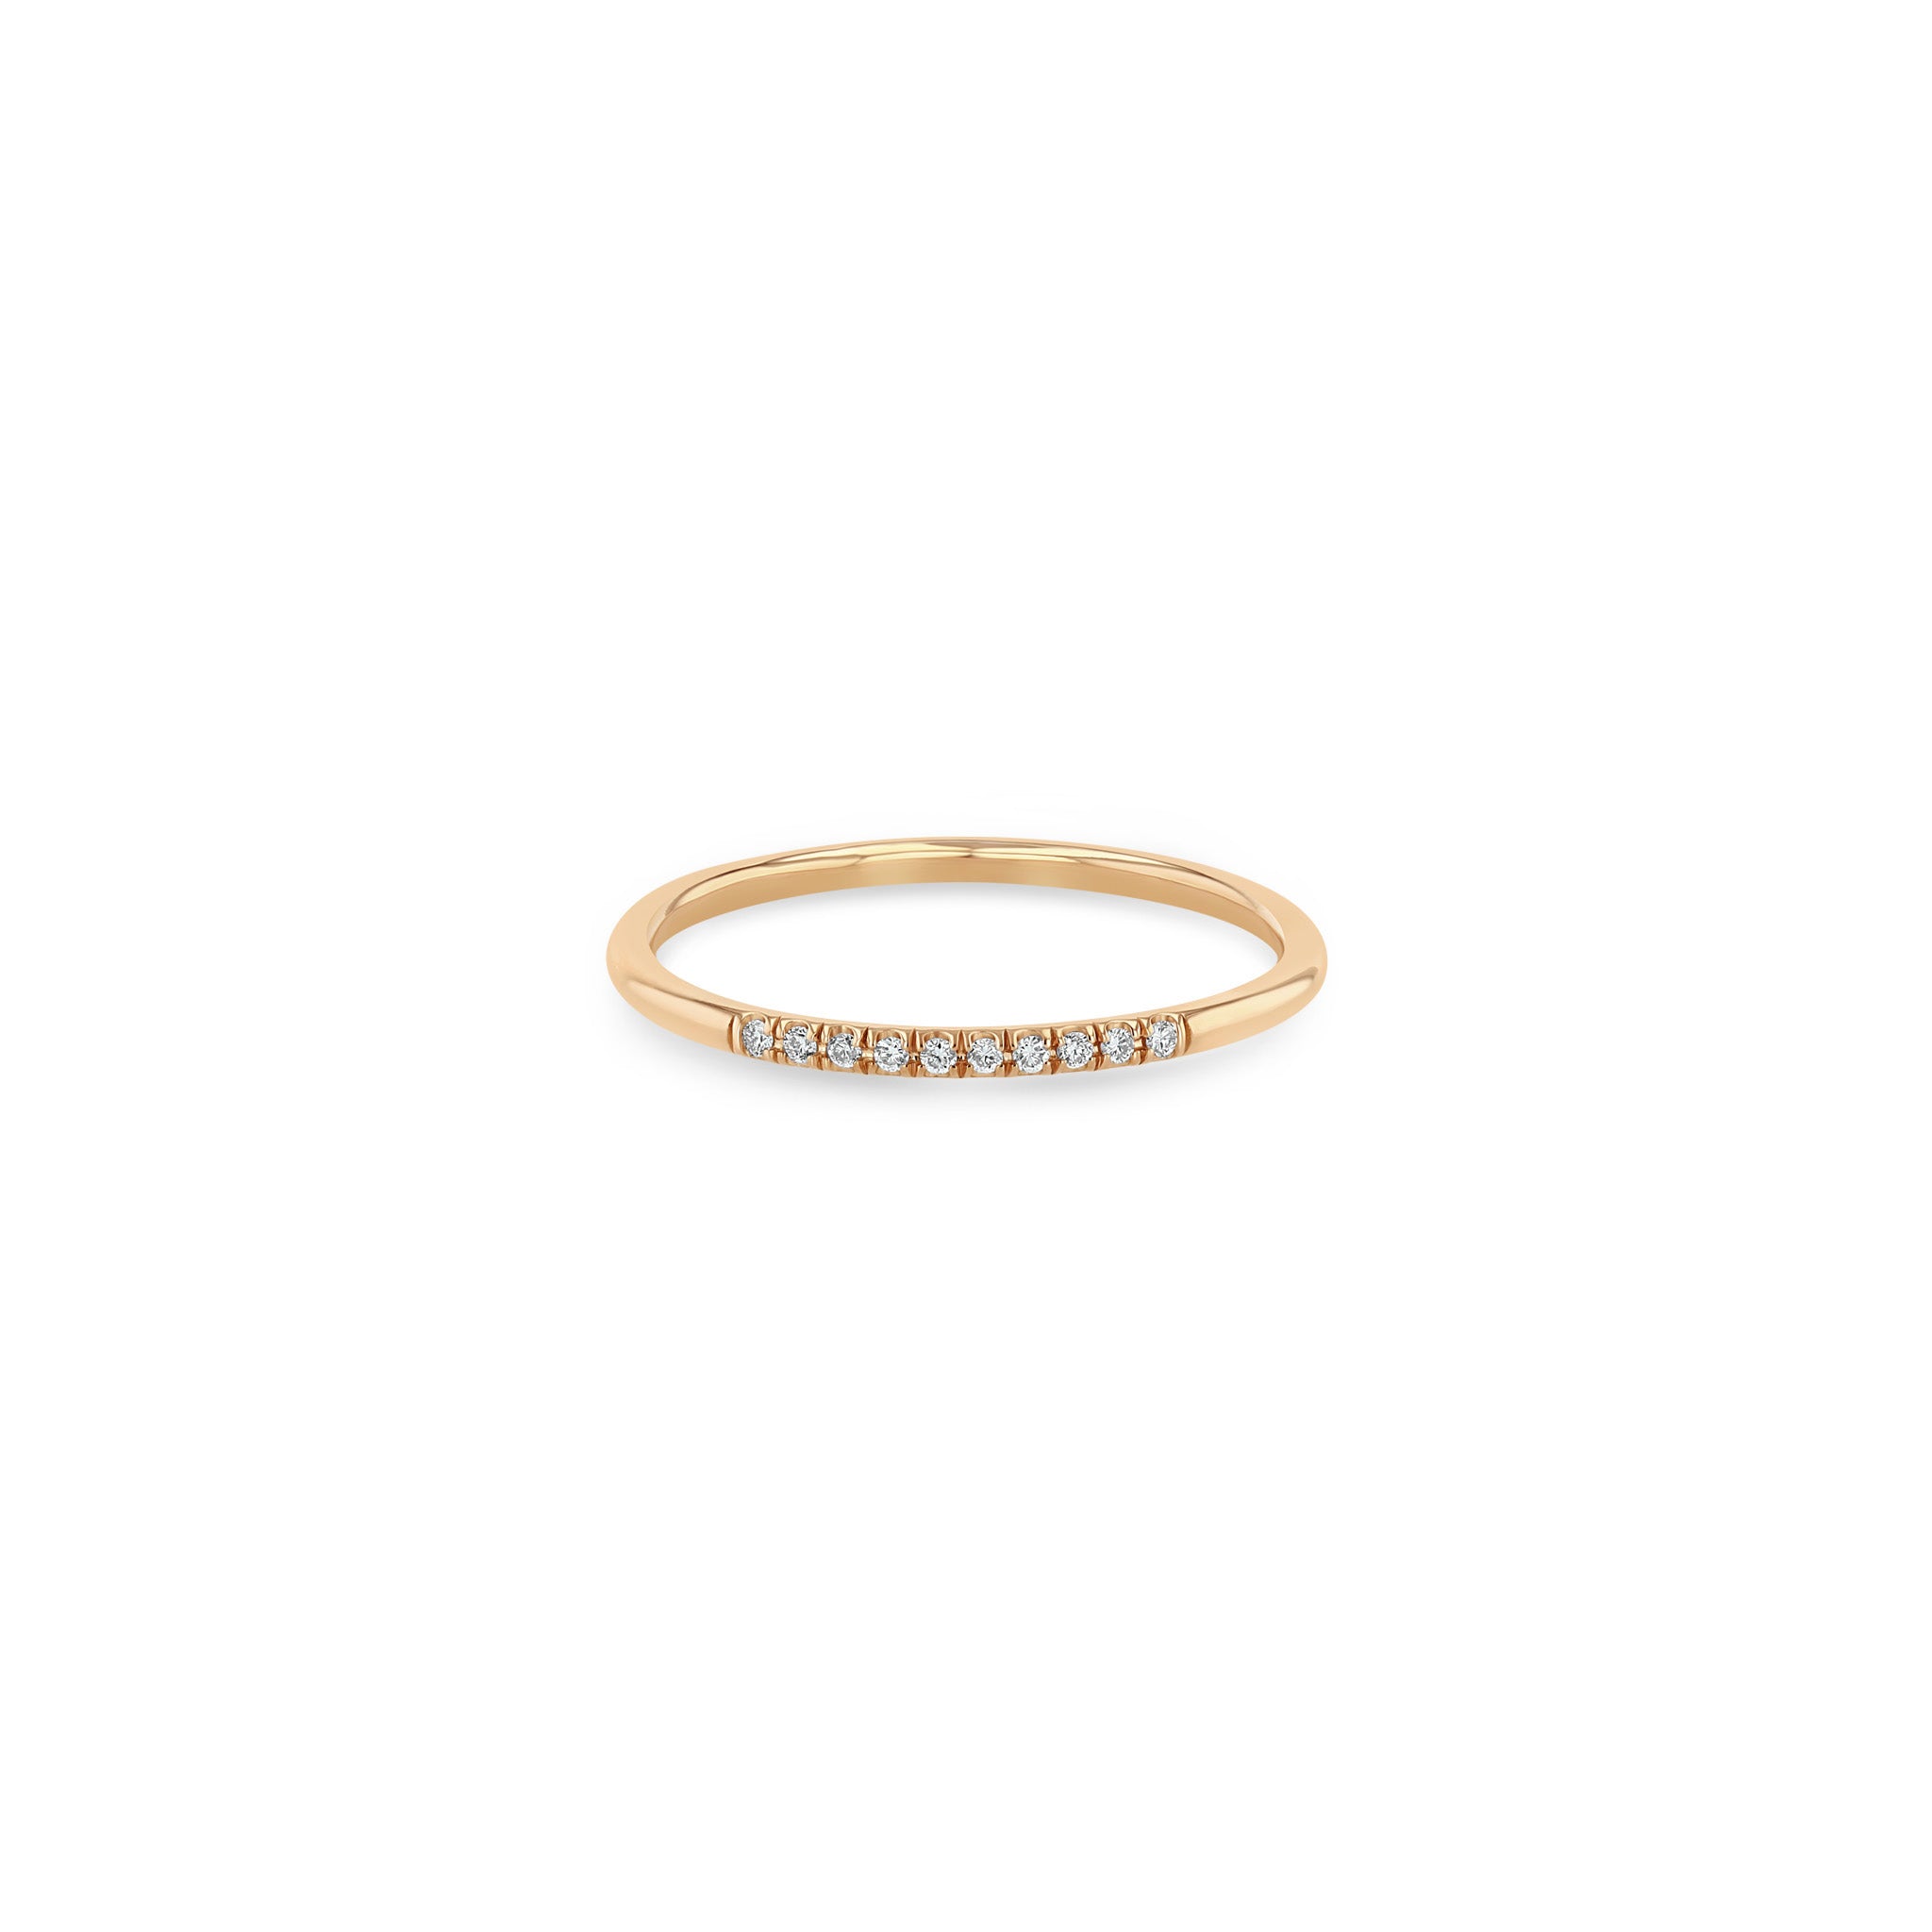 Gold Band Ring with 10 Pave Set Diamonds